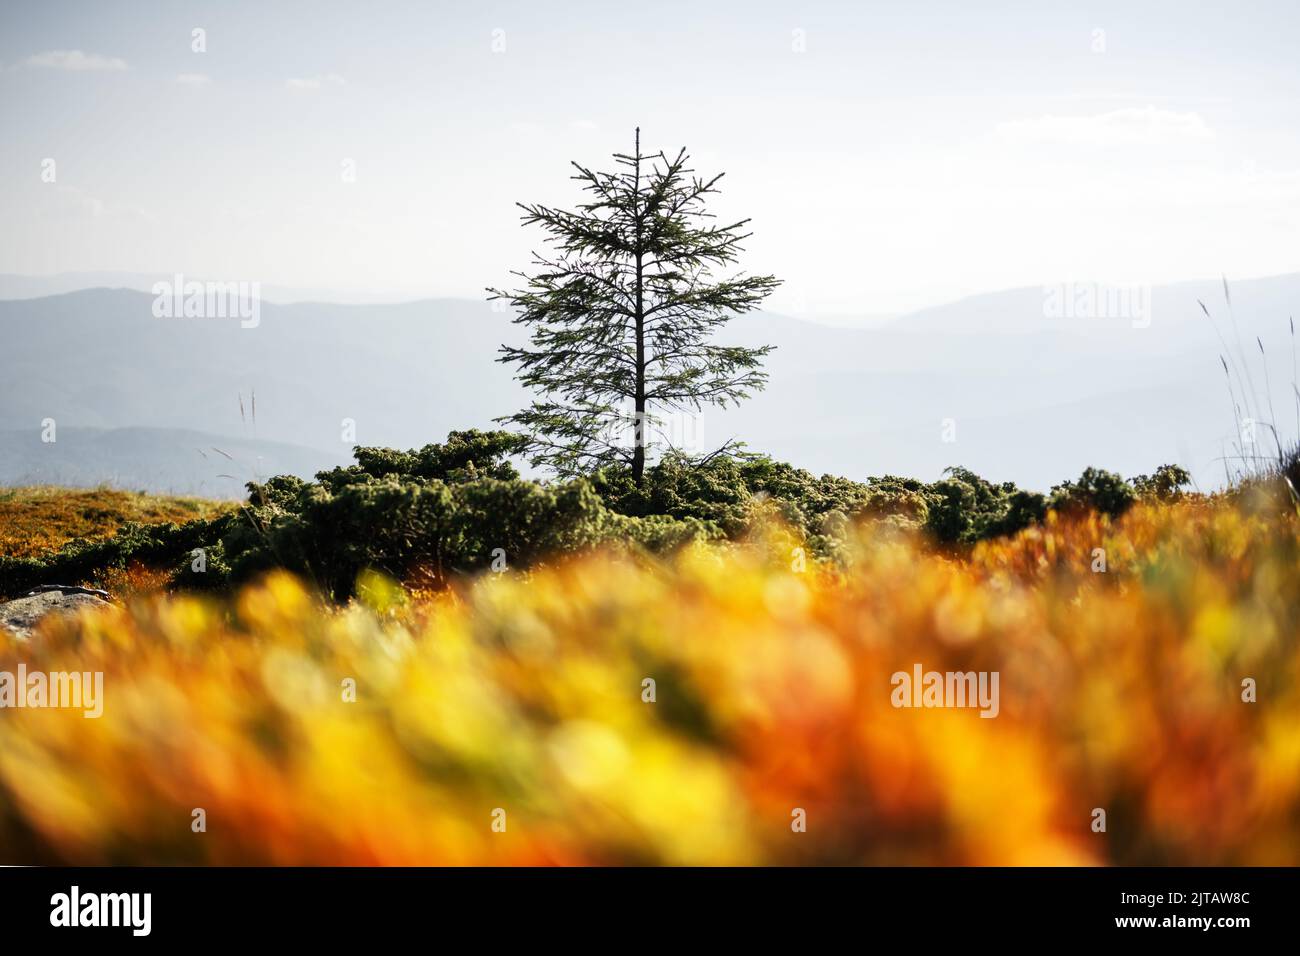 Lonely fir tree on autumn mountains meadow. Beautiful sunrise on background. Landscape photography Stock Photo